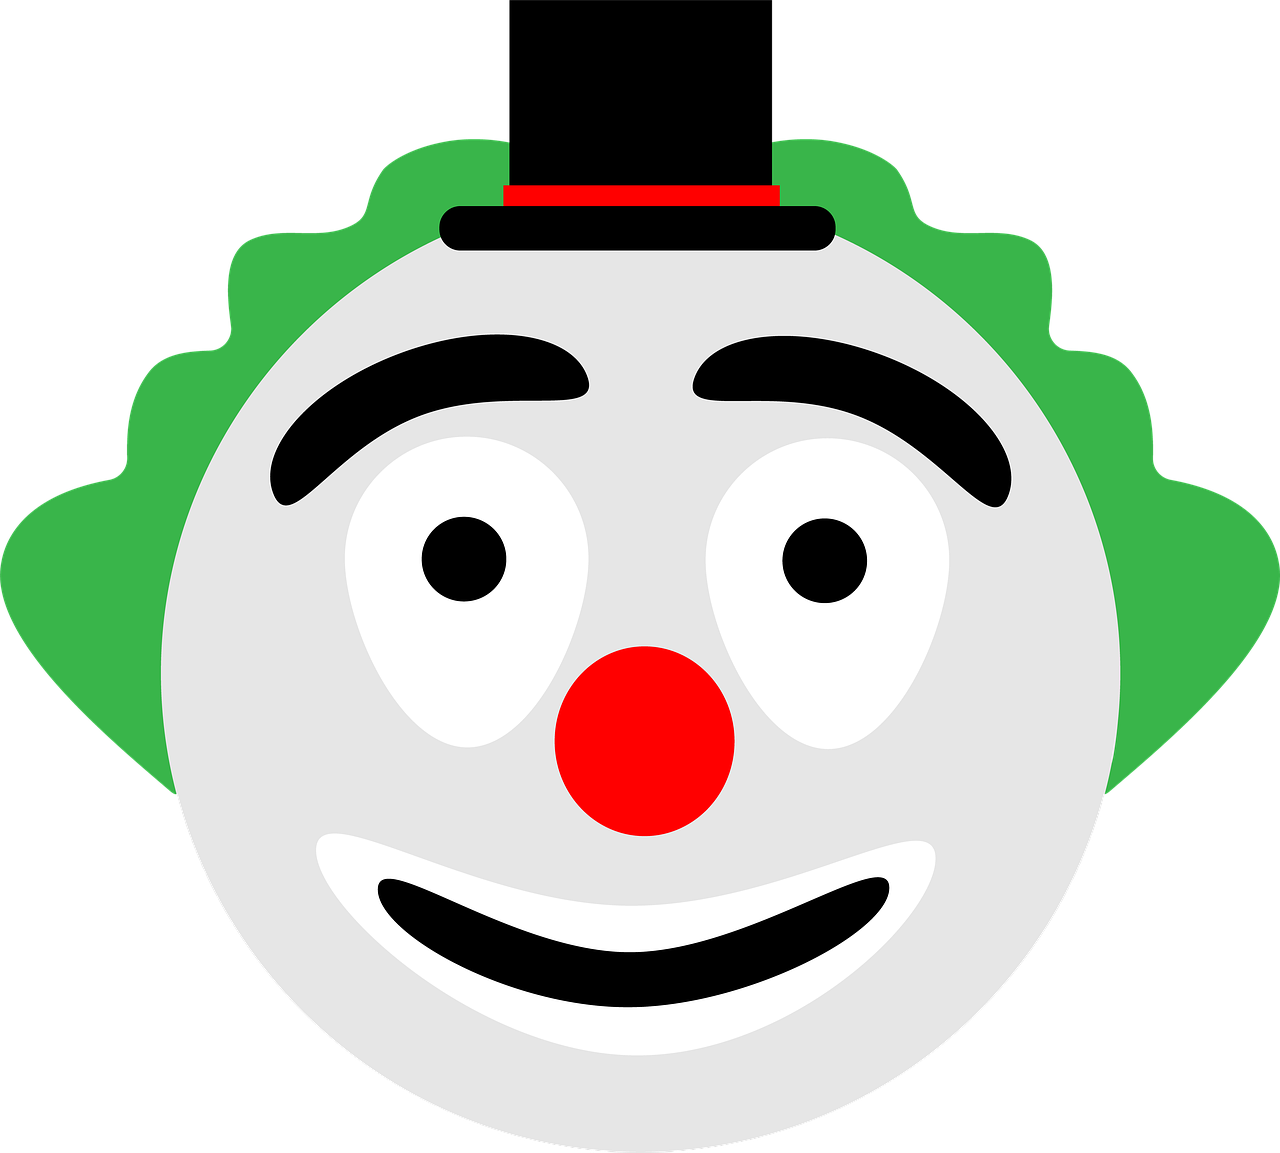 Clown Face PNG HD Image